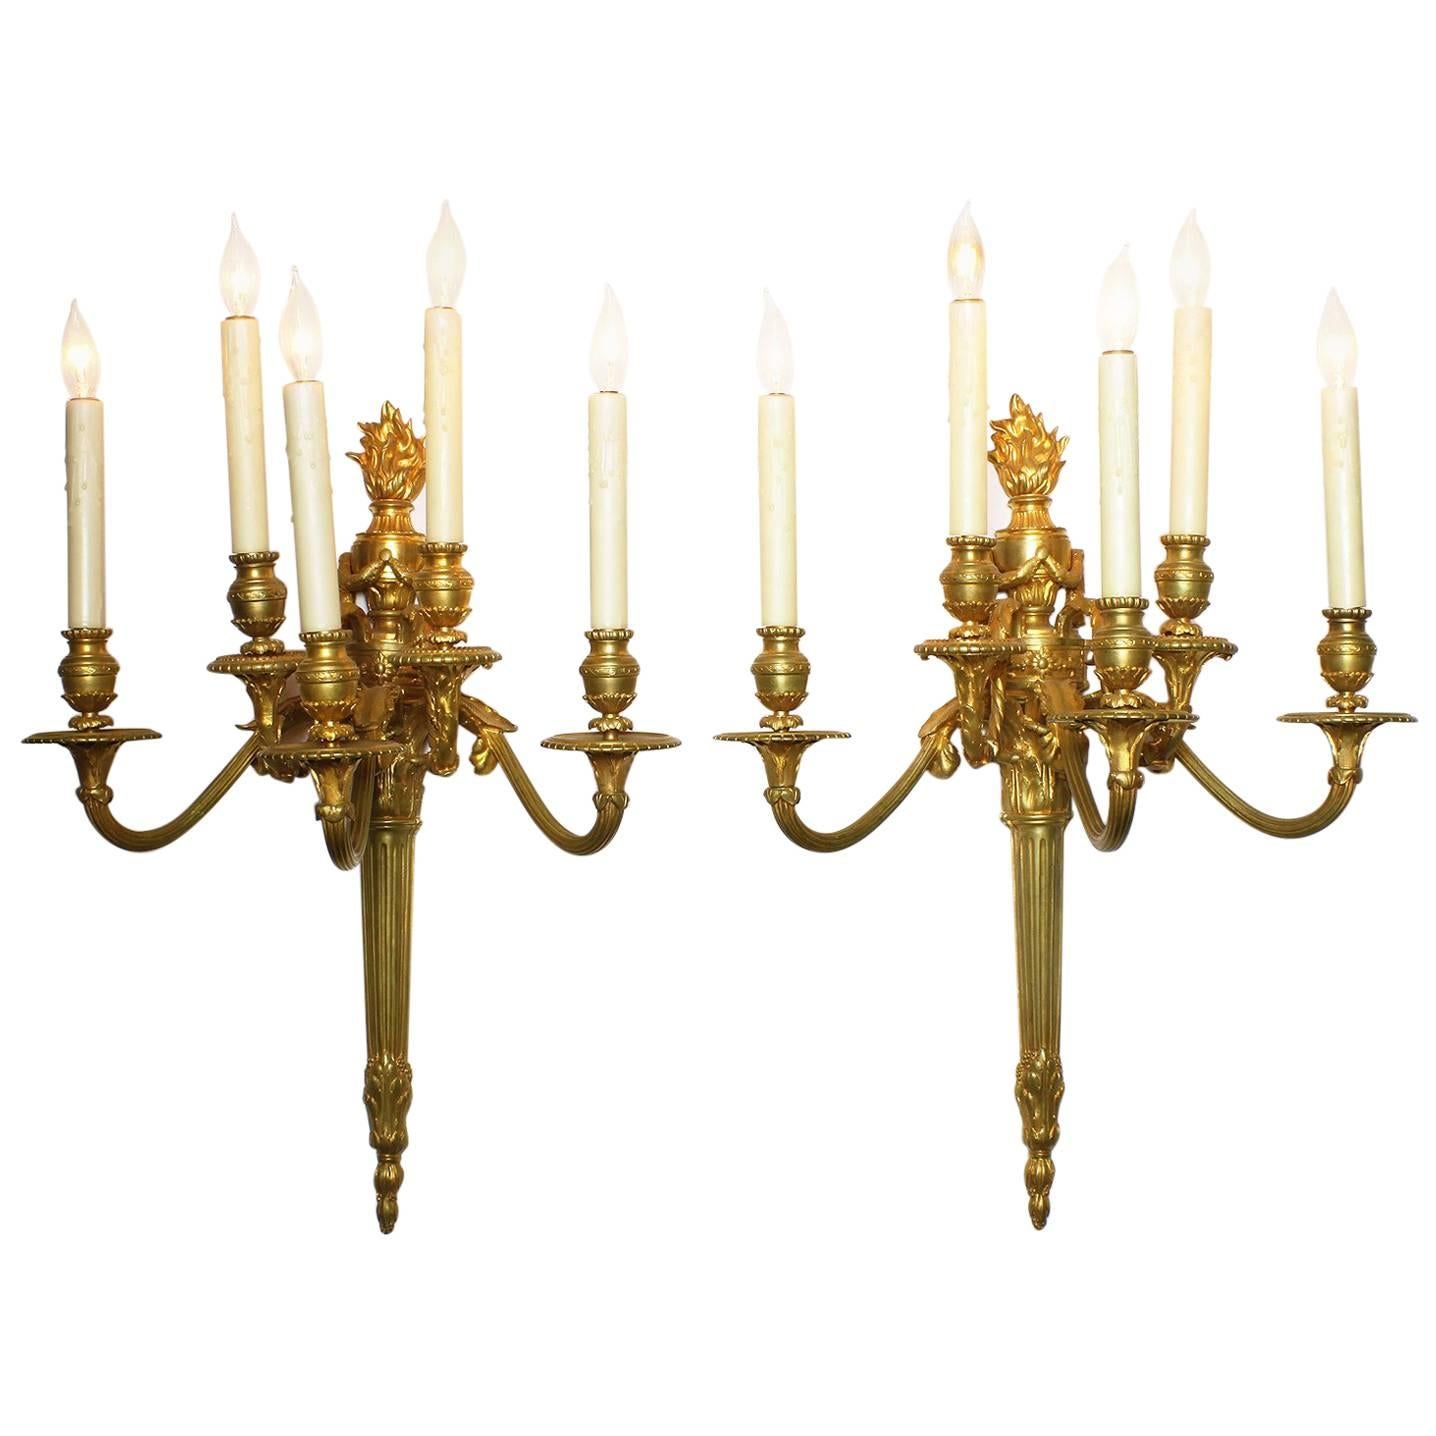 Pair of French 19th Century Louis XVI Style Gilt Bronze Five-Light Wall Sconces